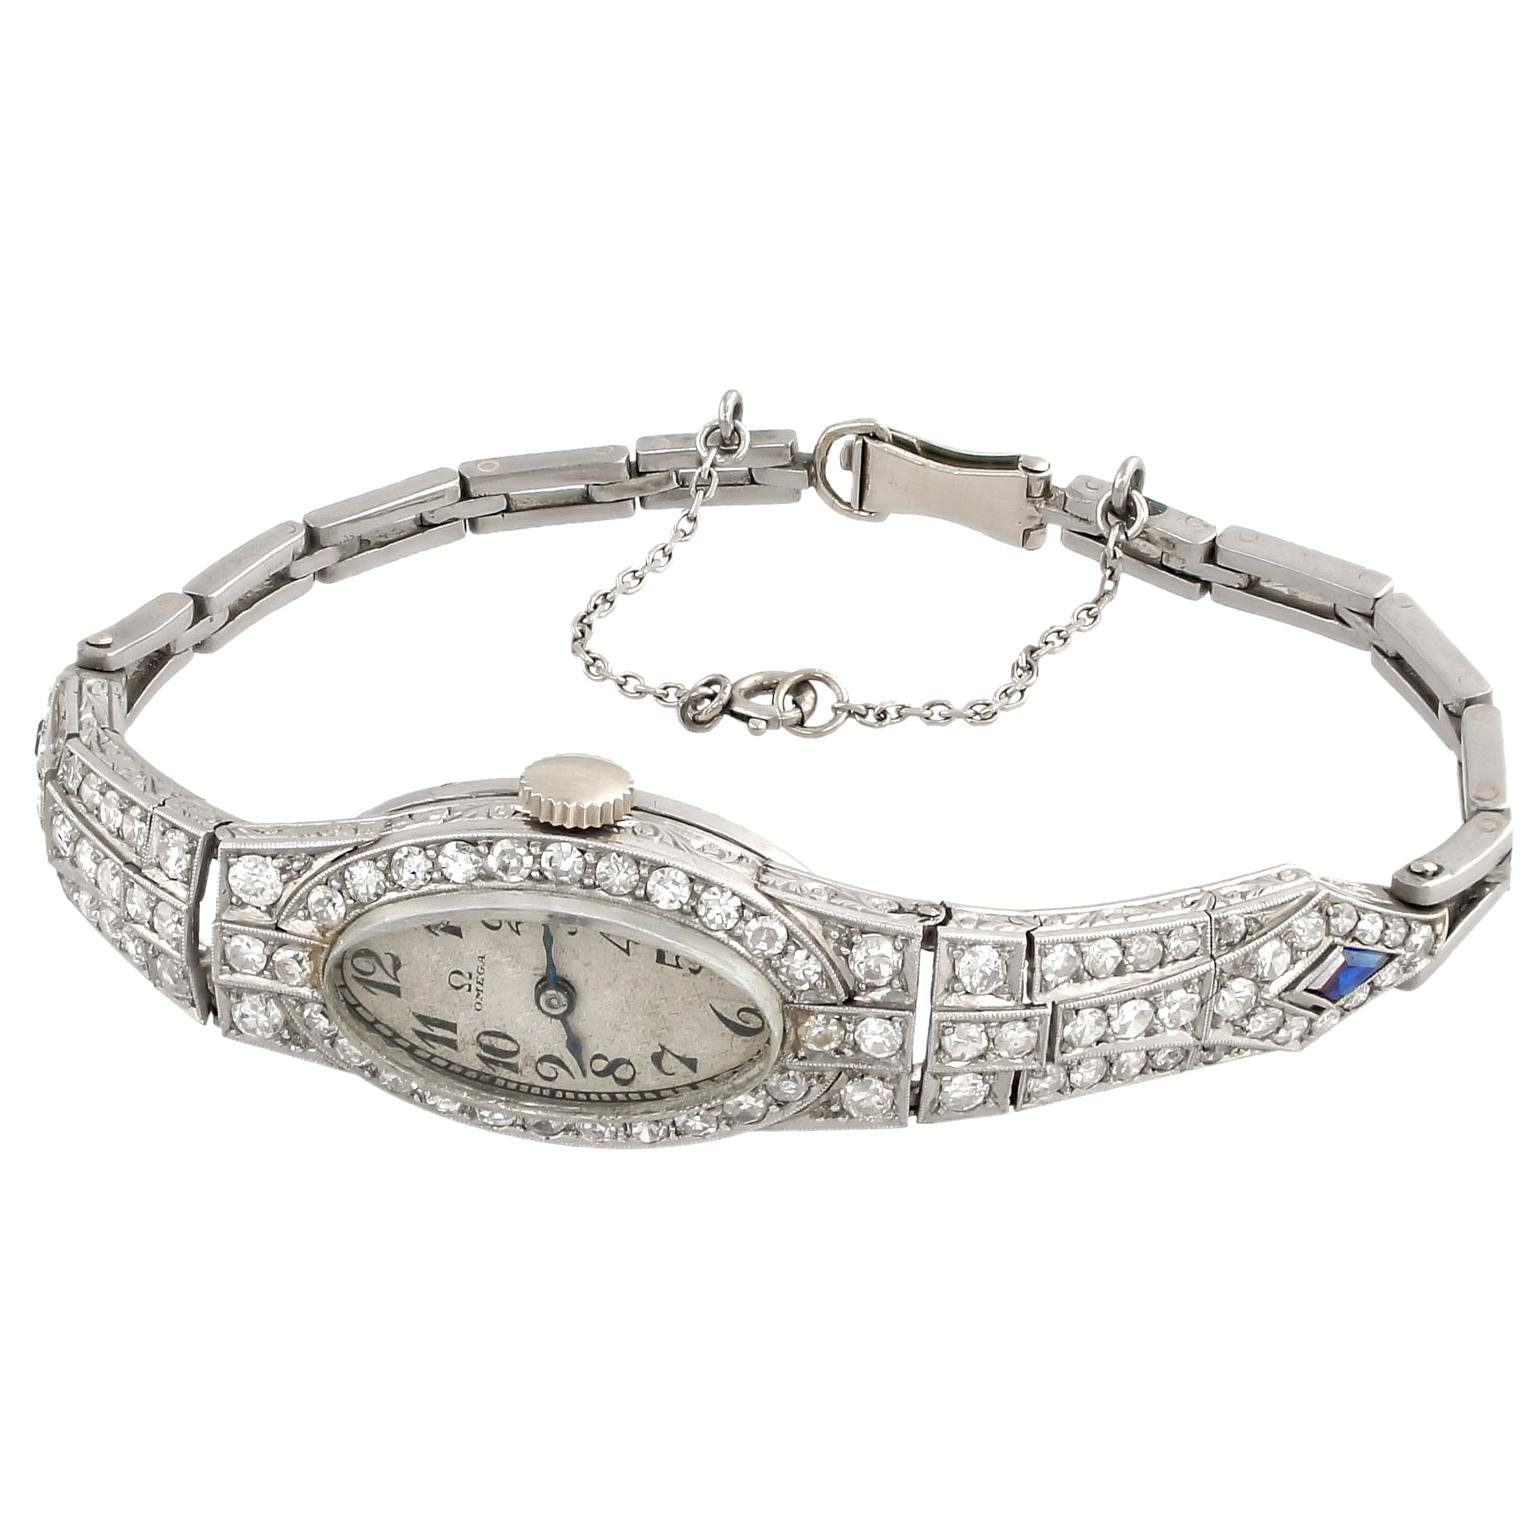 Art Deco Omega wristwatch in platinum and white gold embedded with 90 diamonds totalling 1.80 carats.
Circunference 16.5 cm (6,5 in)
Dial: 15 x 28 mm (0.59 x 1.1 in)